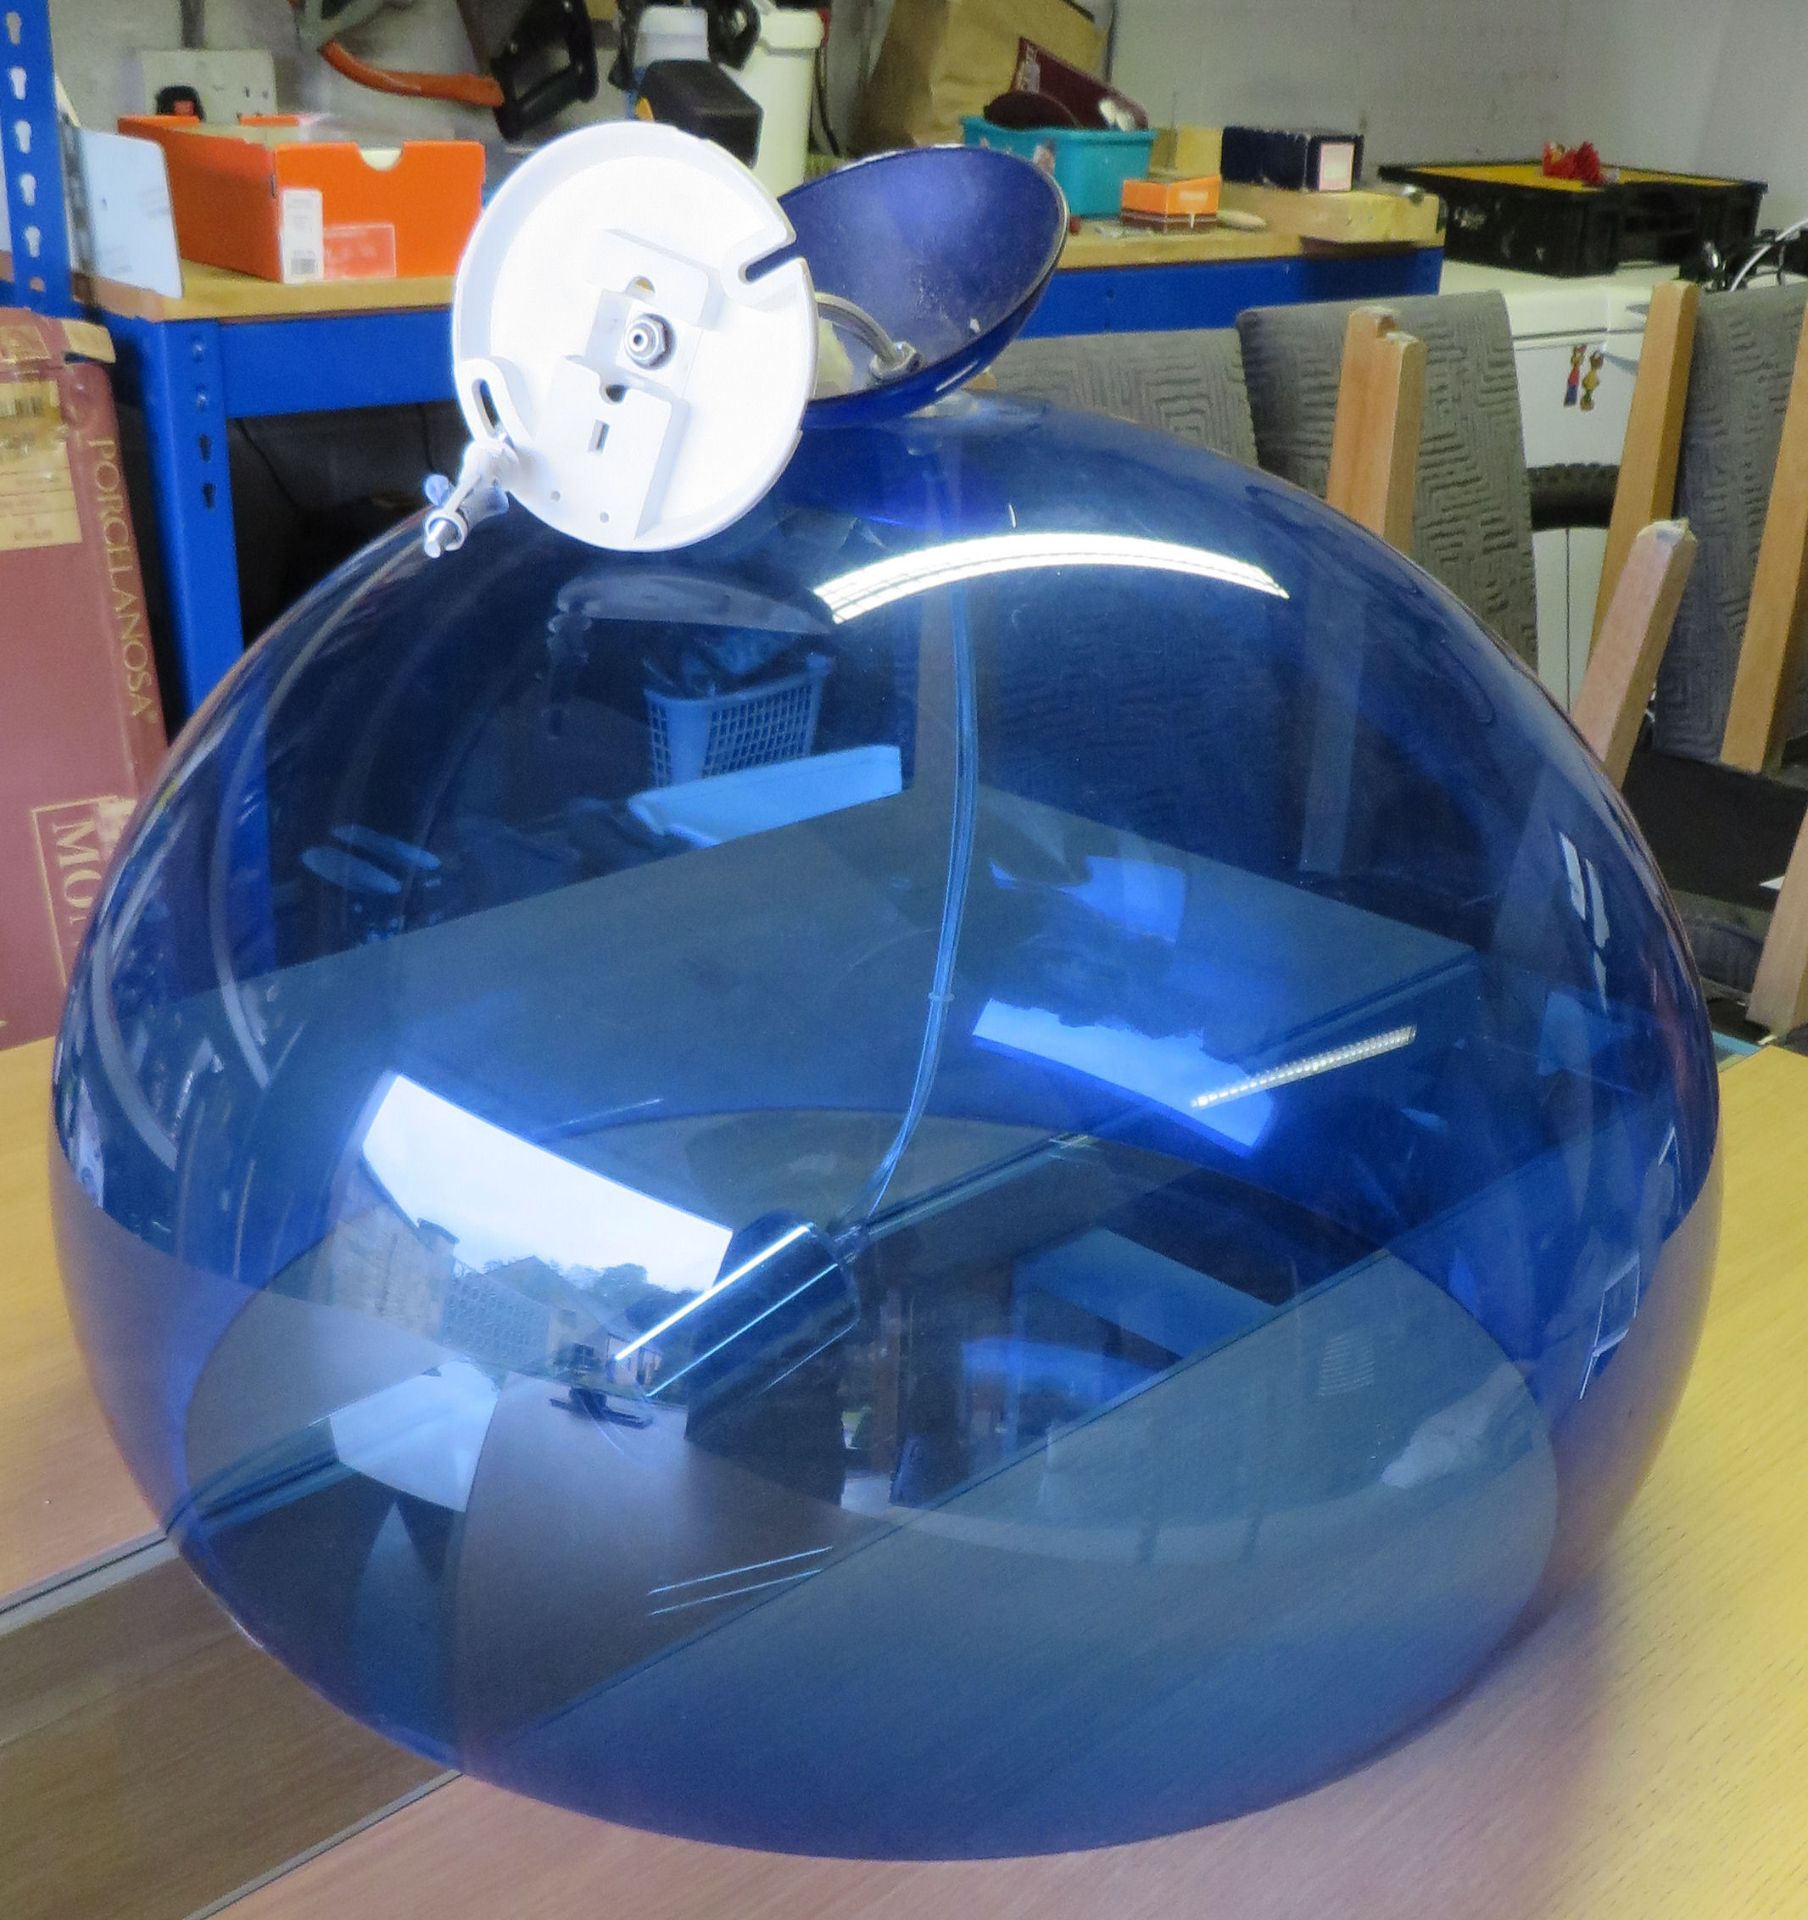 1 x Kartell Fly Contemporary Blue Perspex Pendant Light - 52cm Diameter x 33cm Height - CL175 - - Image 3 of 3